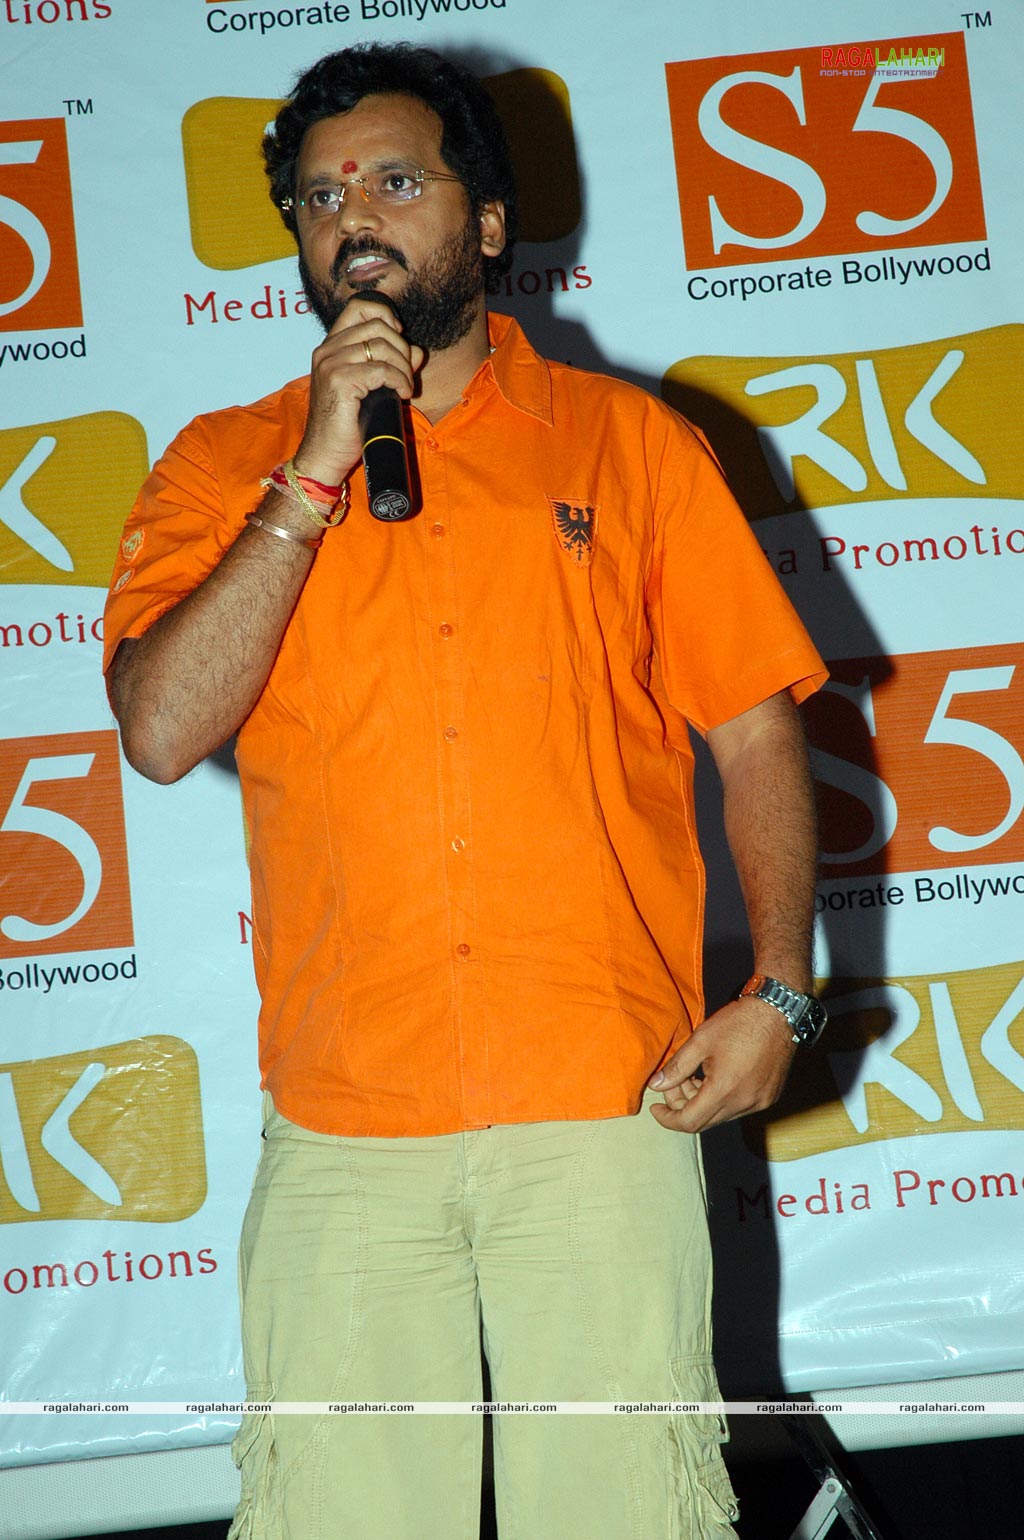 RK Media Promotions Launch